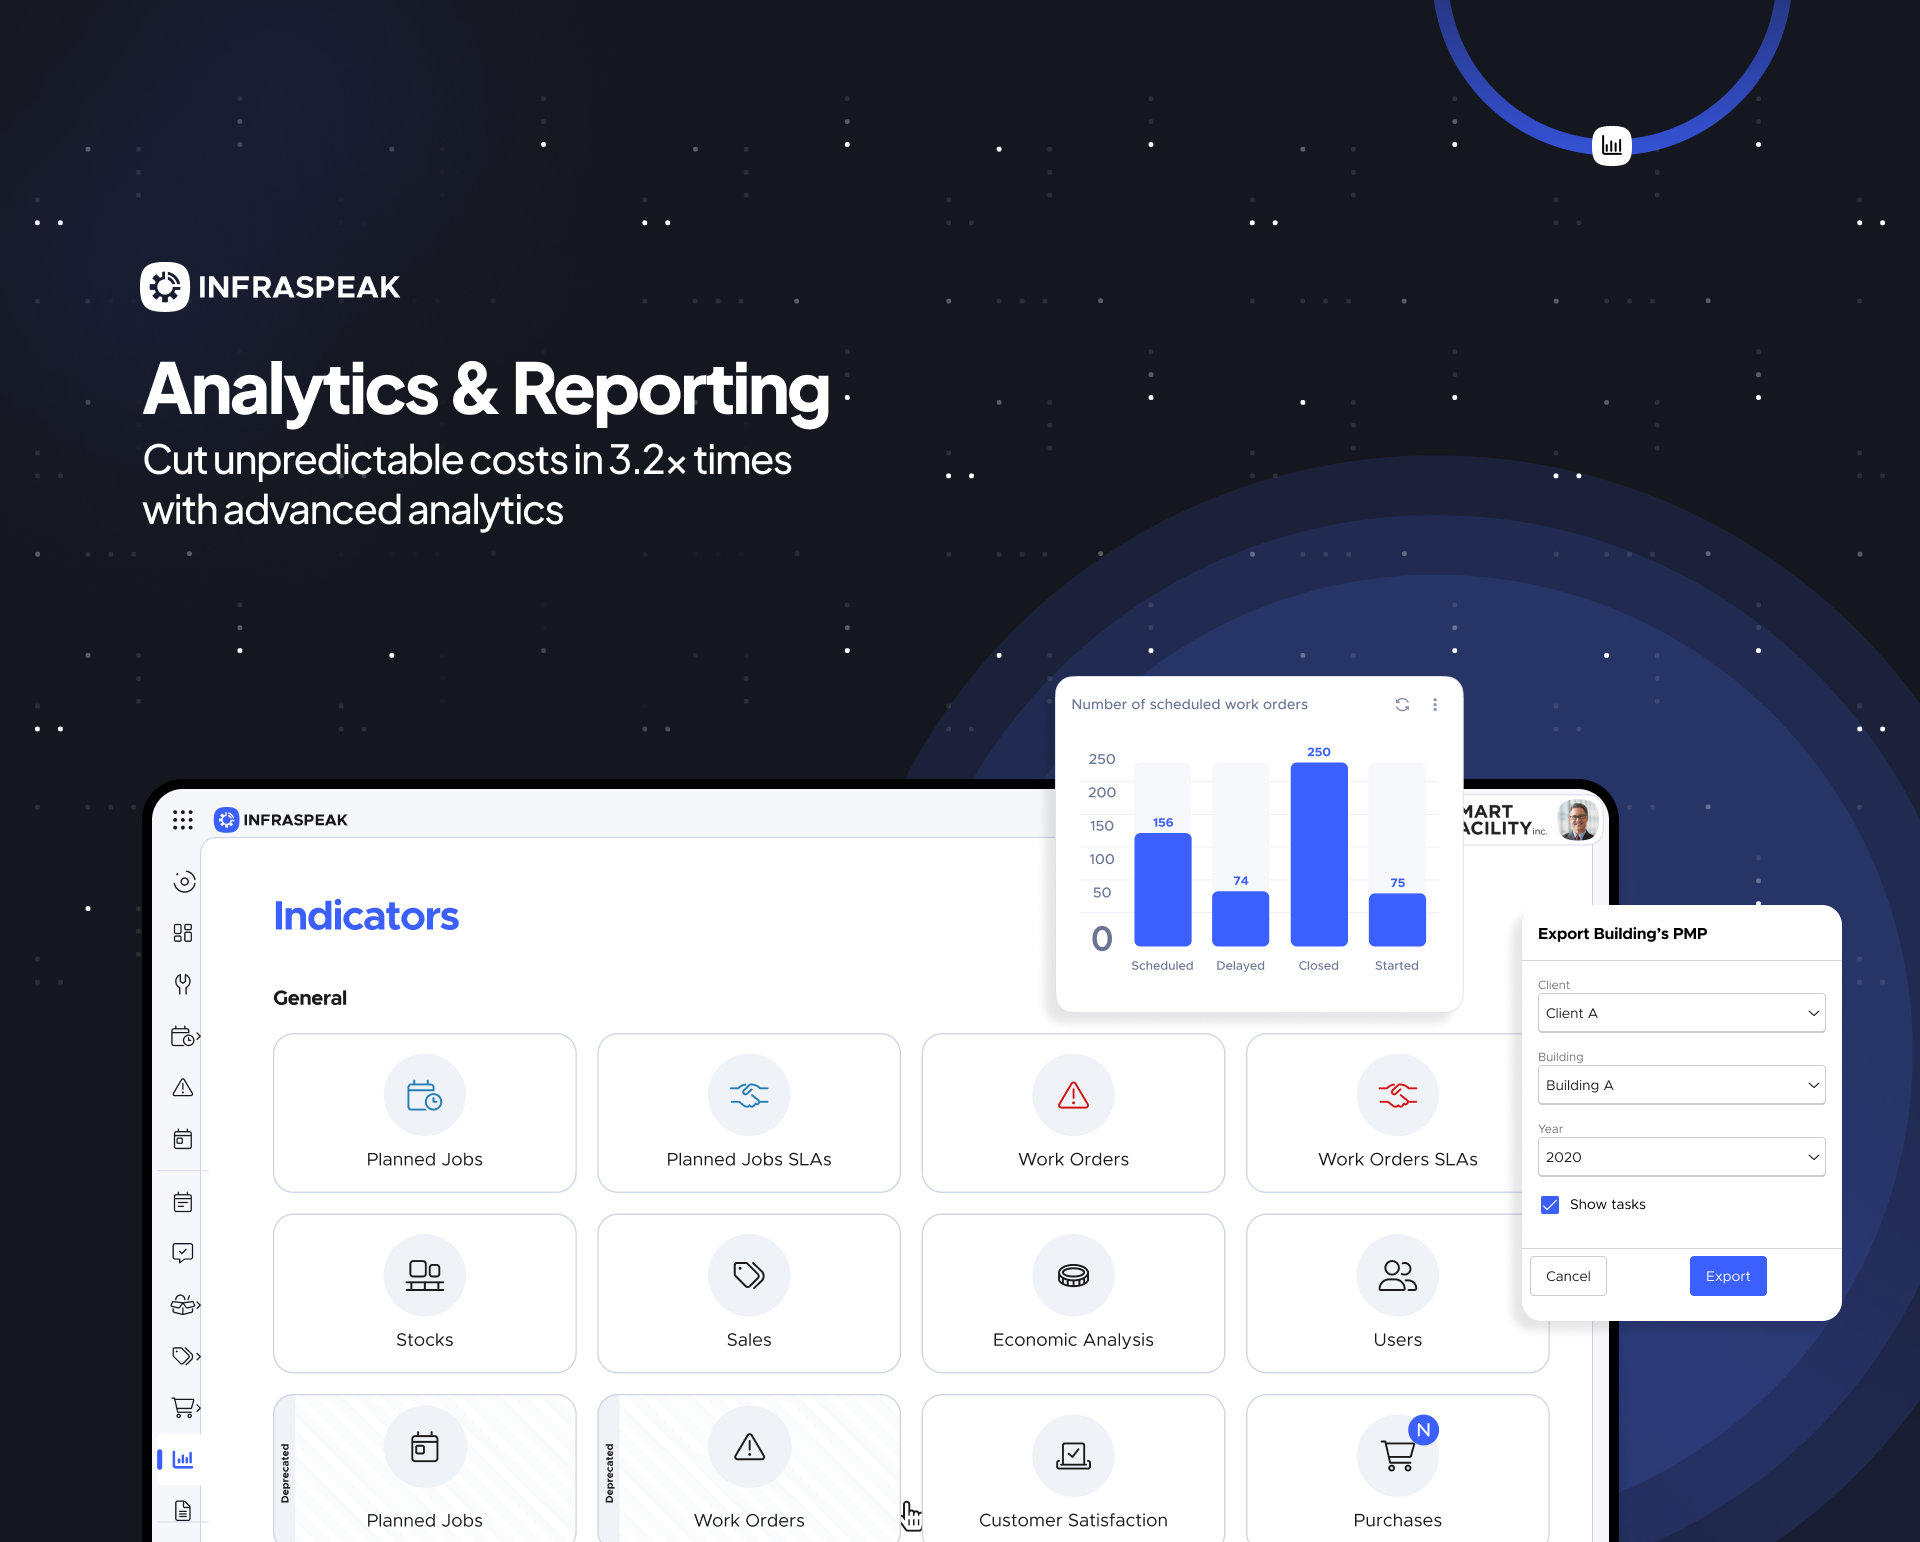 Track crucial KPIs, build personalised dashboards and explore dozens of robust report templates. This provides comprehensive insights into all corners of your operations — assets, inventory, compliance and more!
